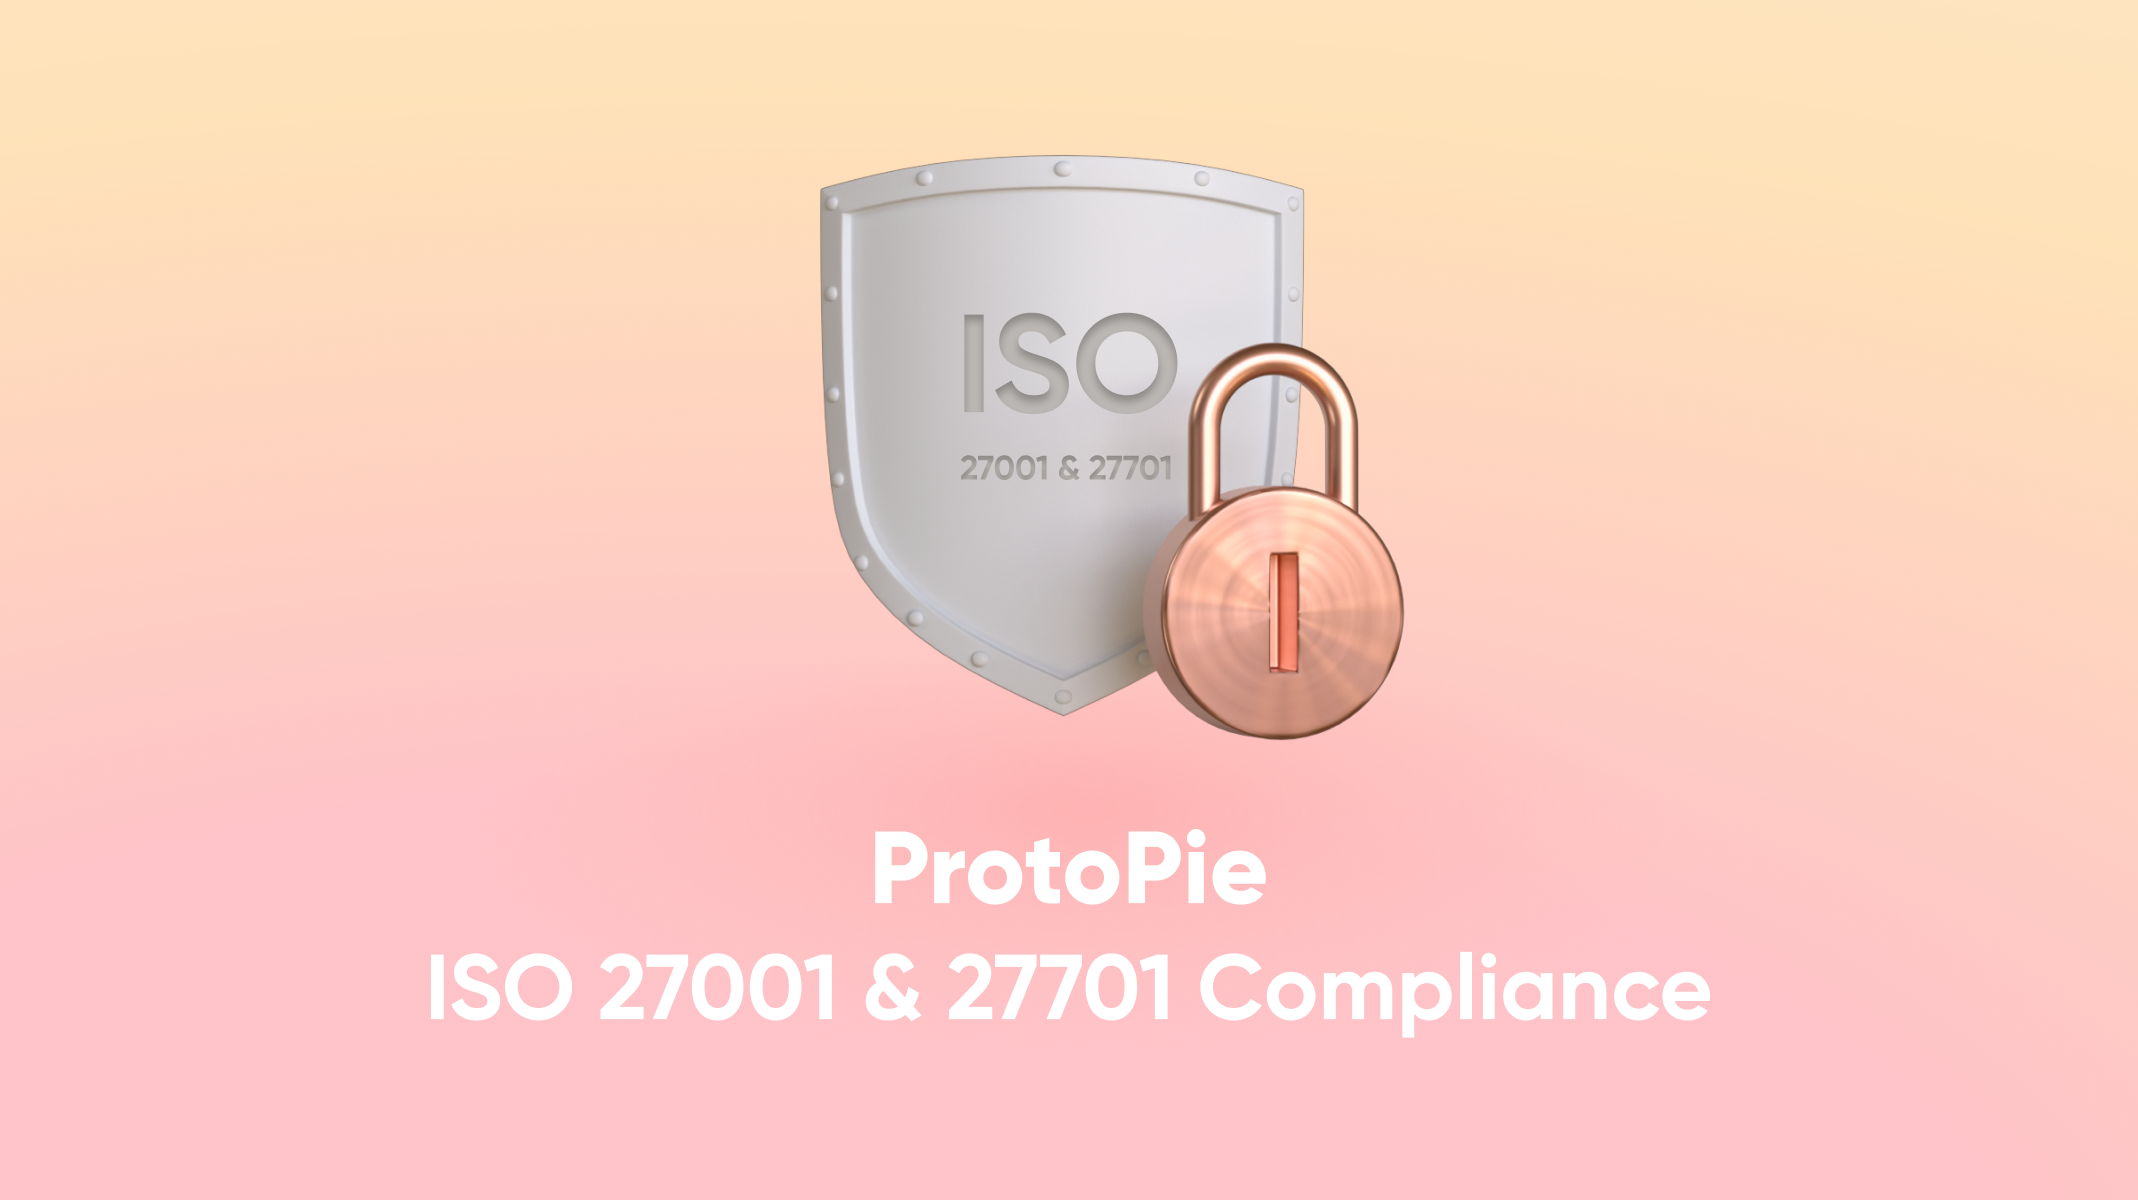 ProtoPie and ISO compliance article thumbnail